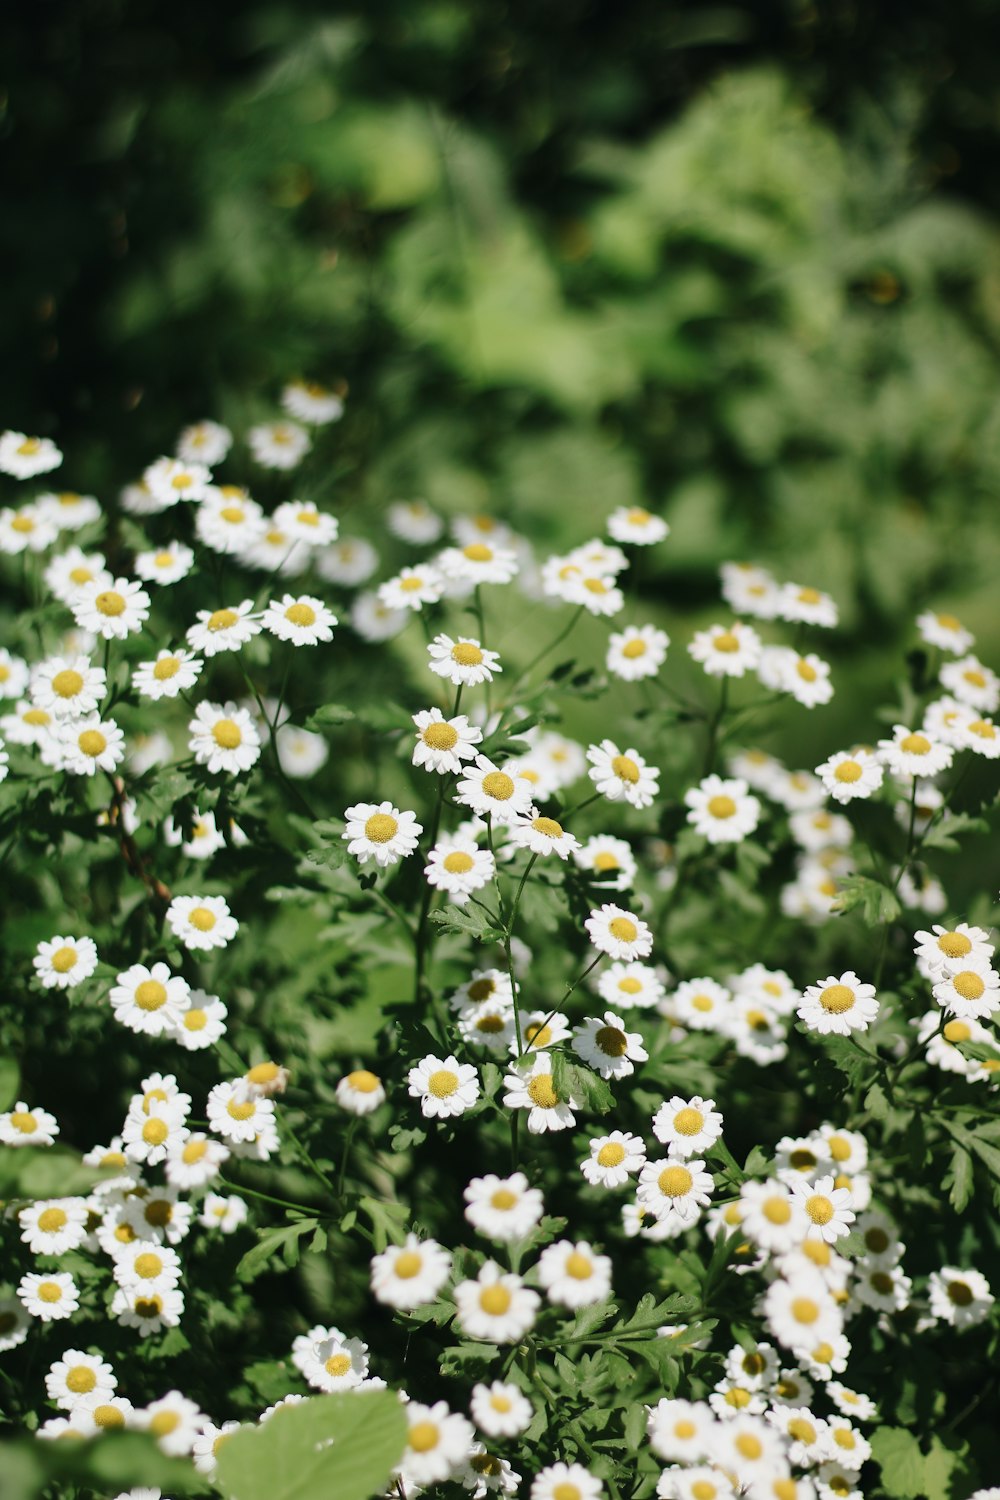 a field full of white daisies and green leaves